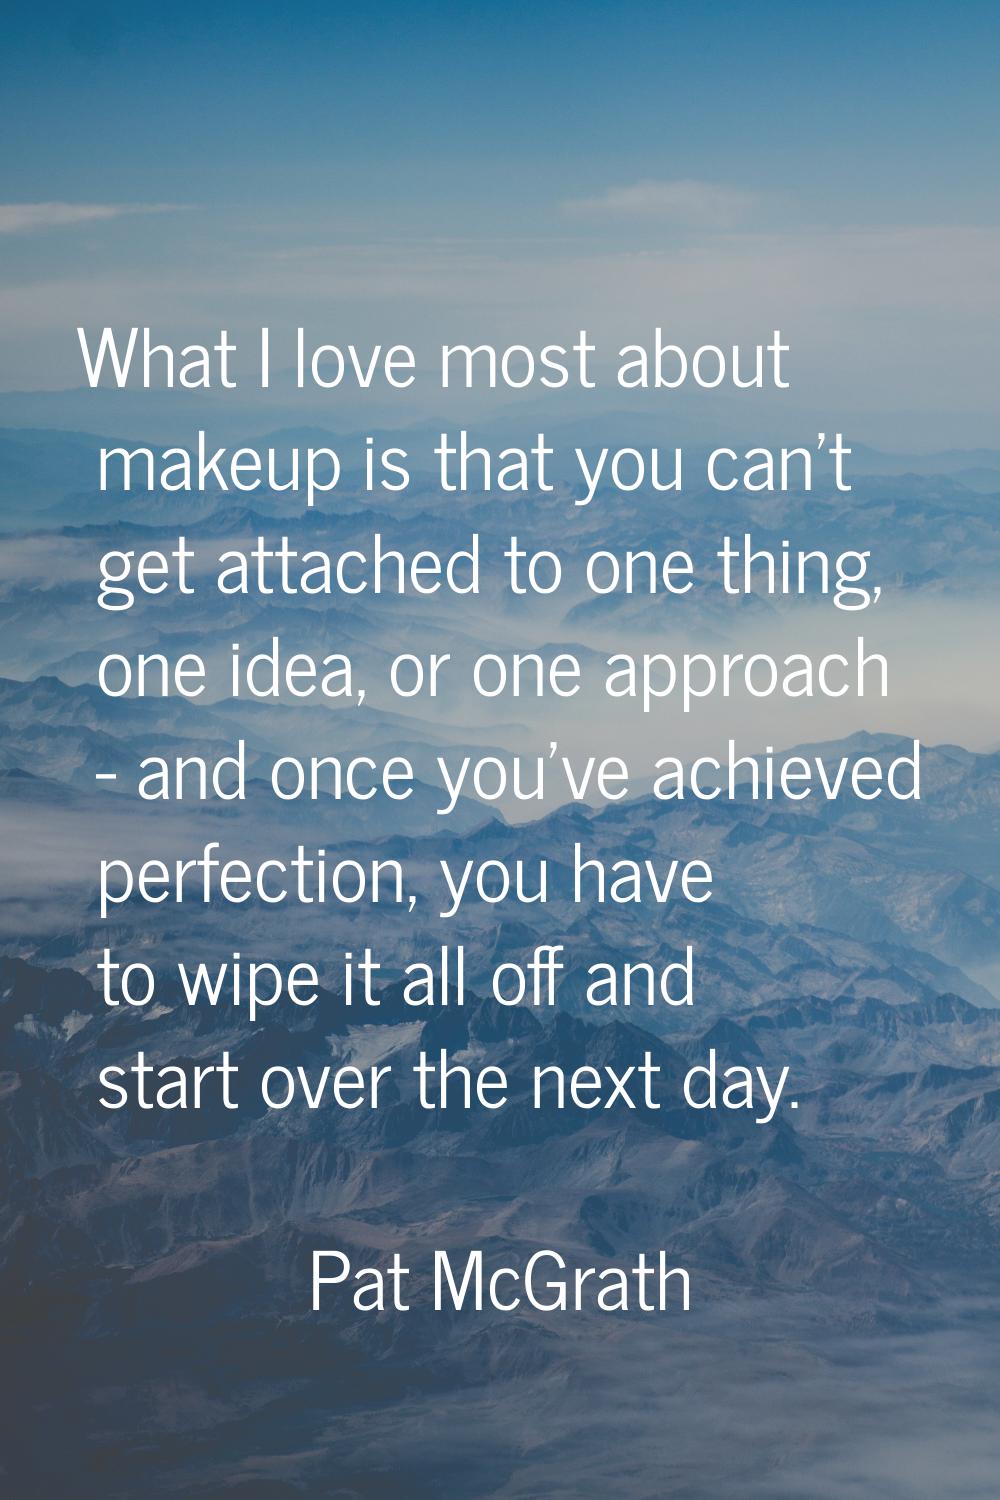 What I love most about makeup is that you can't get attached to one thing, one idea, or one approac